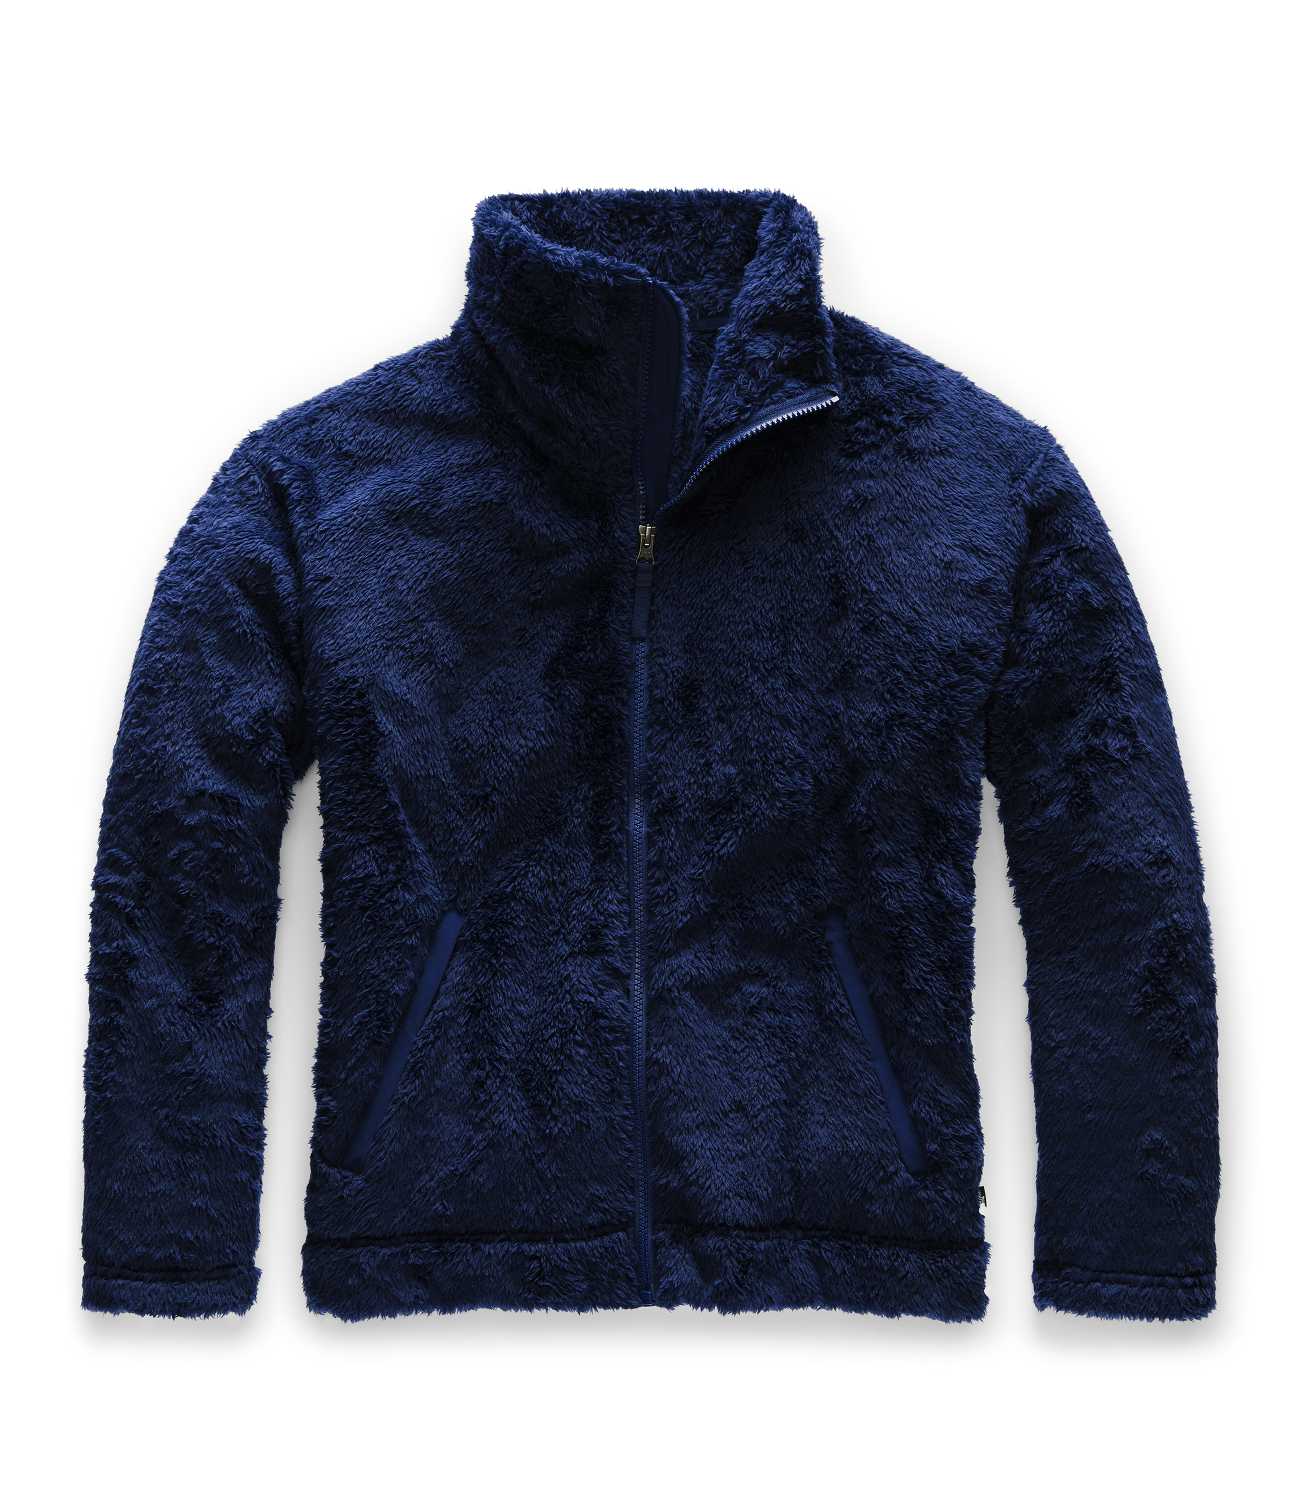 WOMEN'S FURRY FLEECE 2.0 JACKET | The North Face | The North